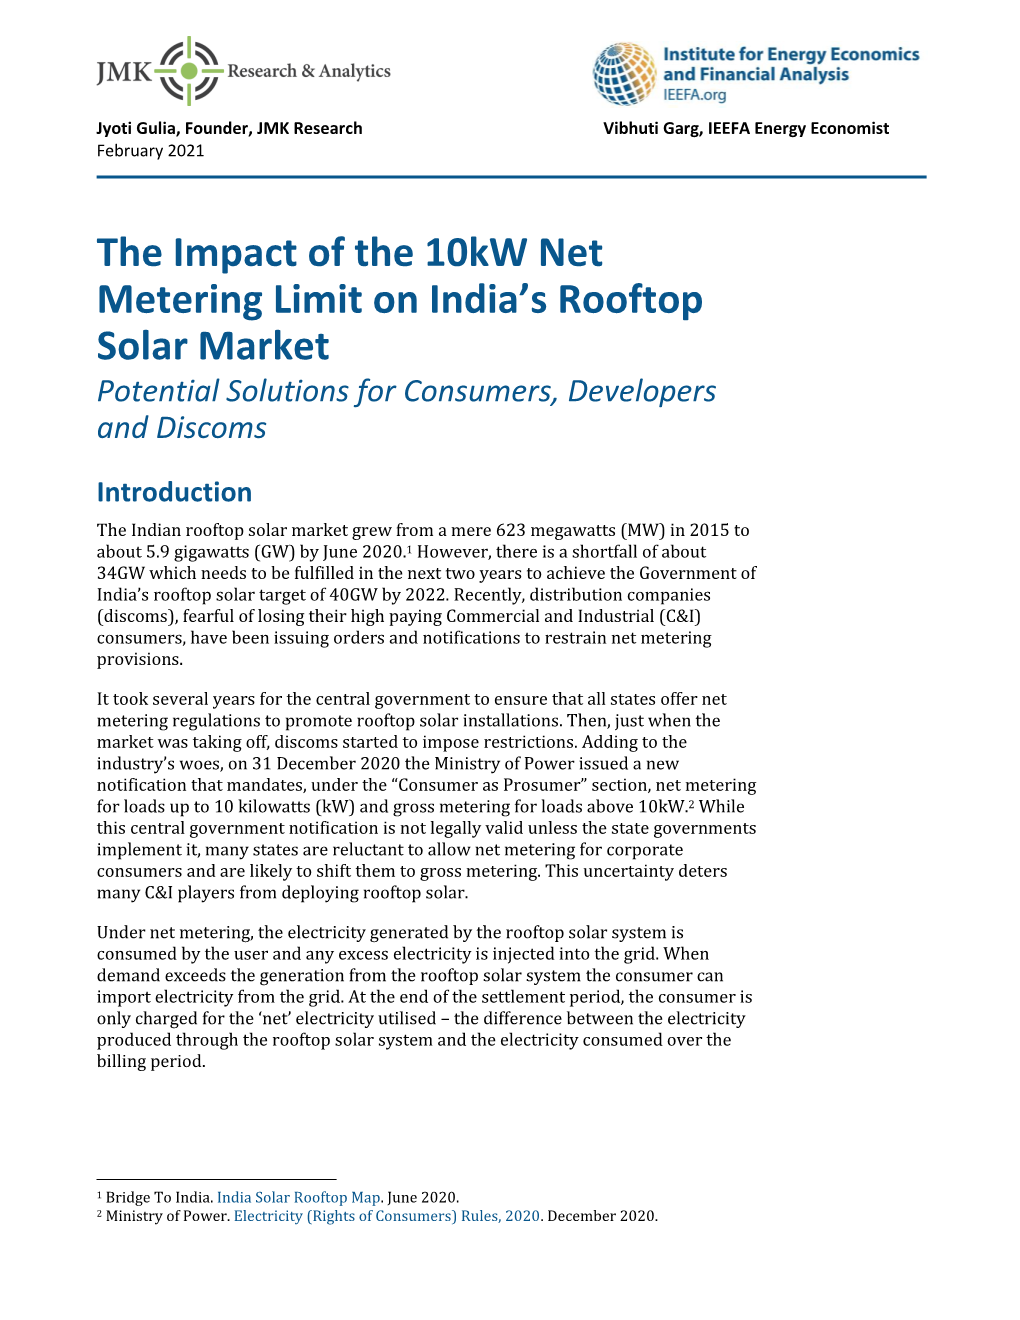 The Impact of the 10Kw Net Metering Limit on India's Rooftop Solar Market